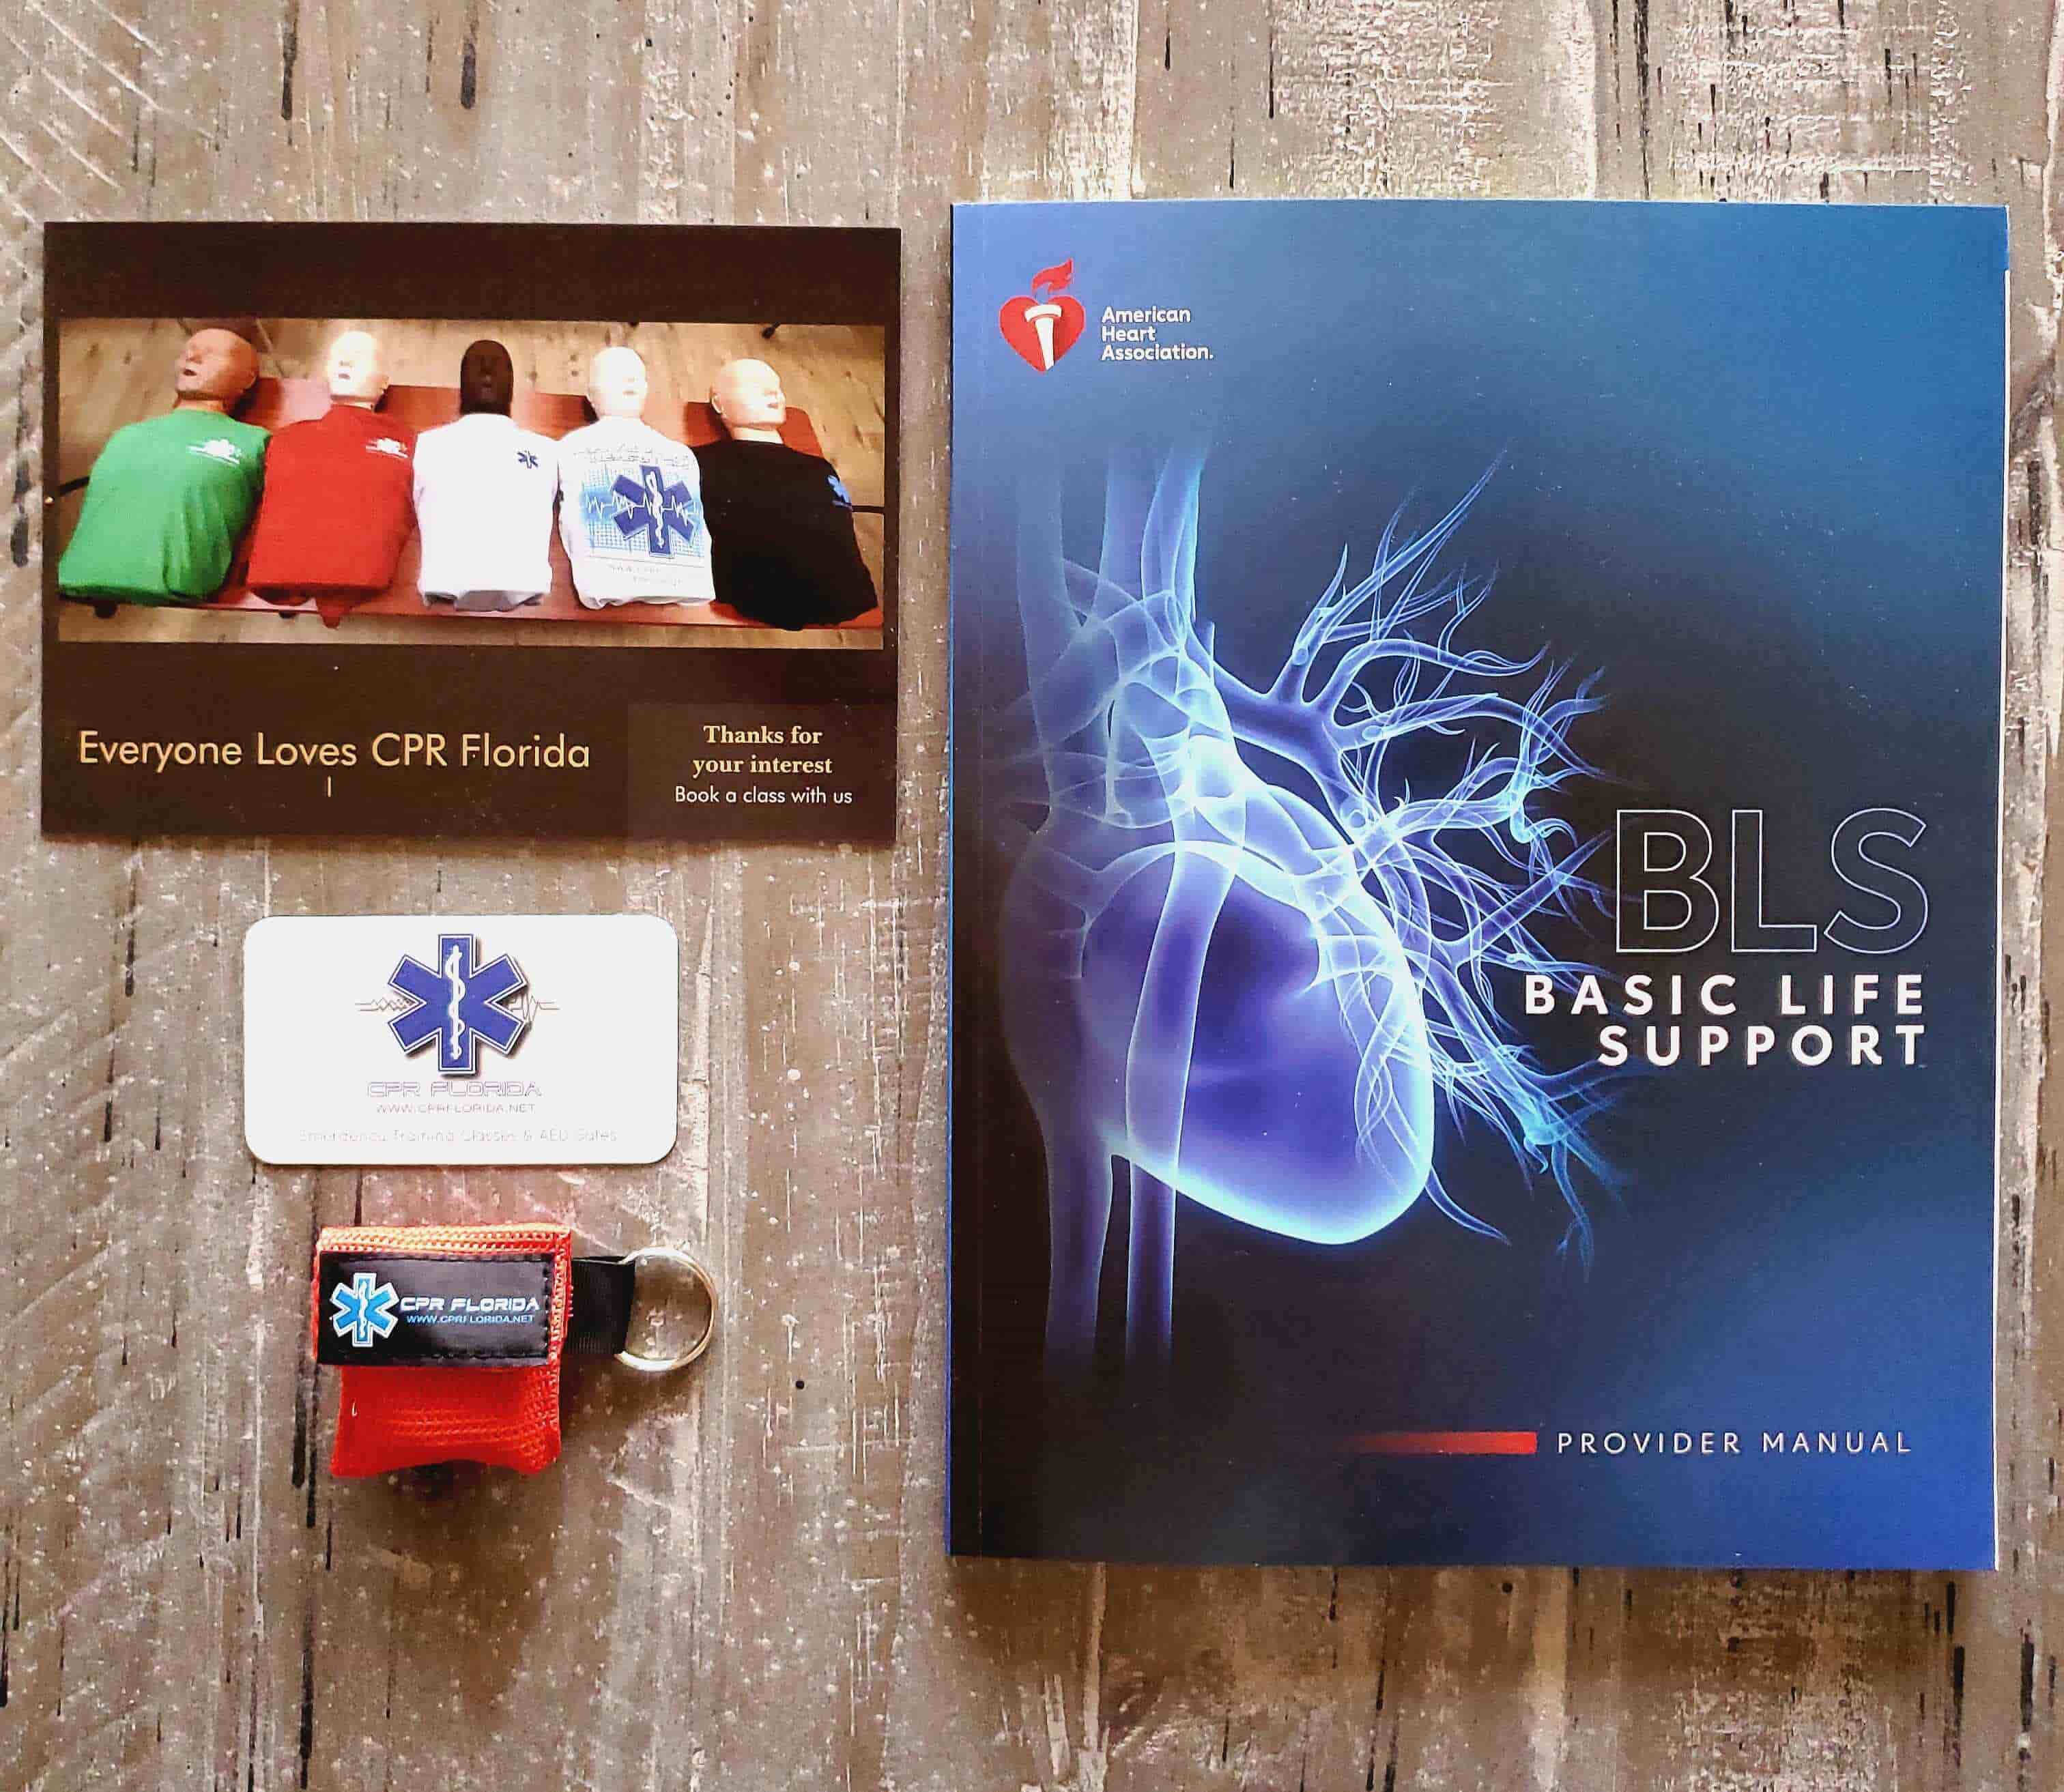 Bls Certification Classes Sign Up For American Heart Association Courses